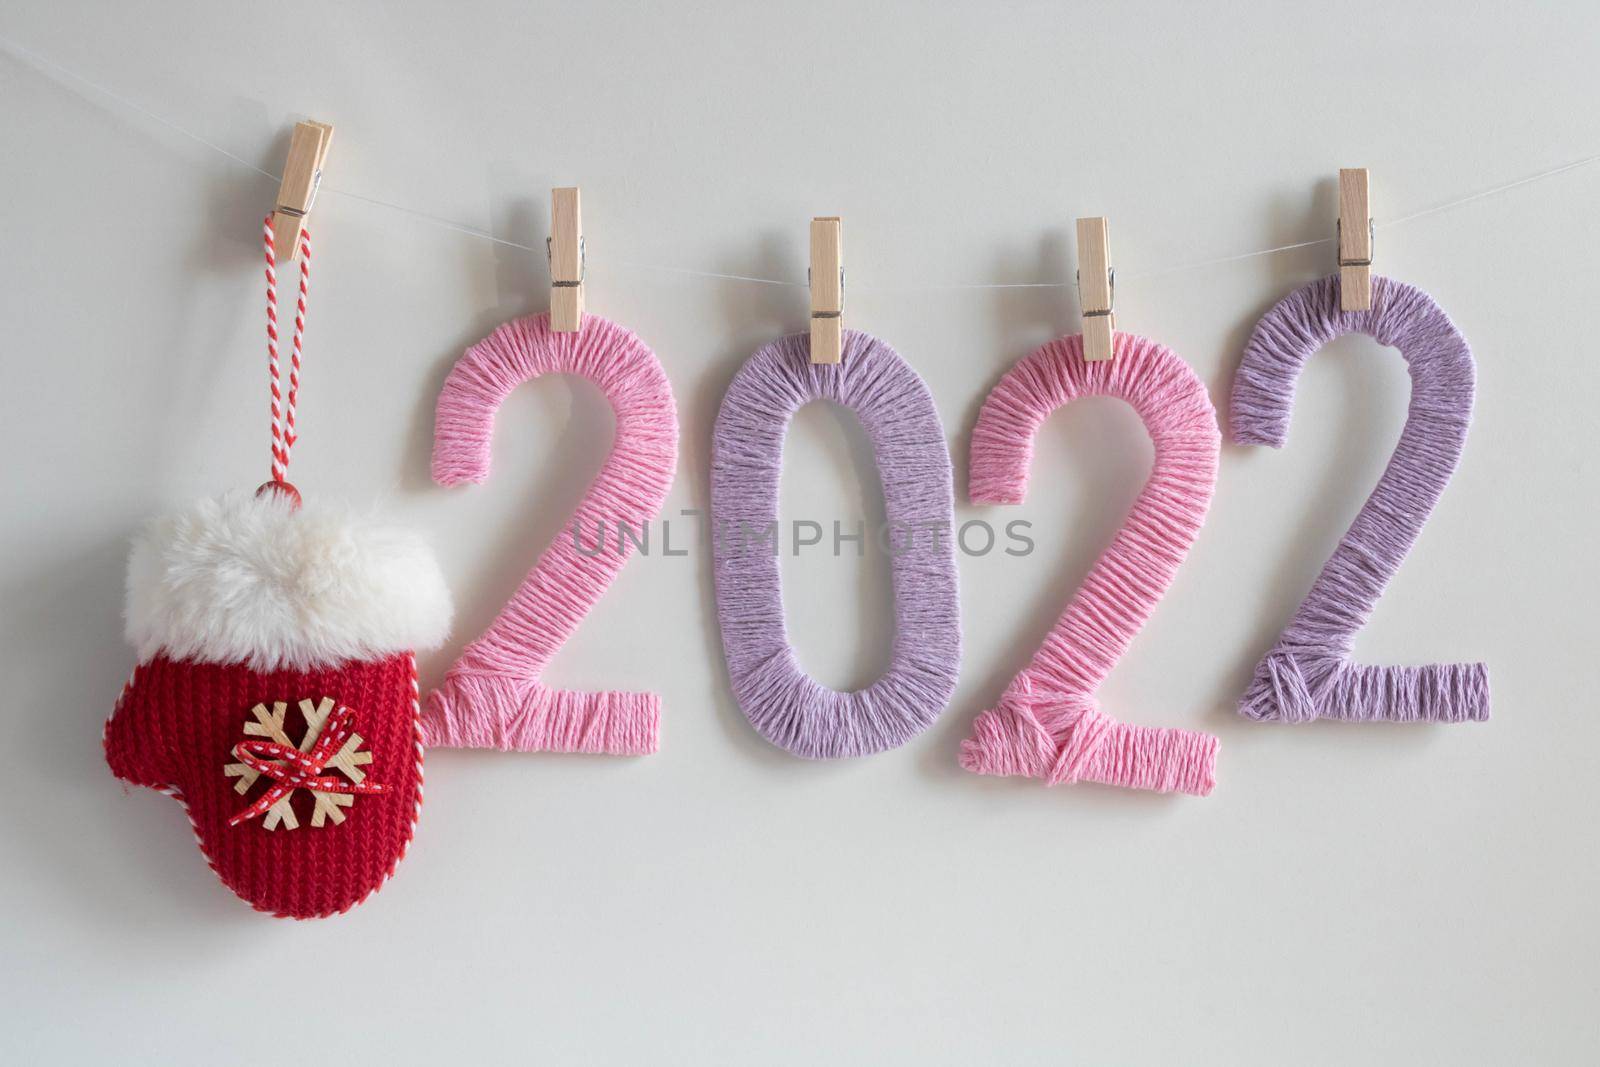 Knitted figures of 2022, made of pink and lilac threads, hang on clothespins on a white background with a red mitten. The concept of the New Year.